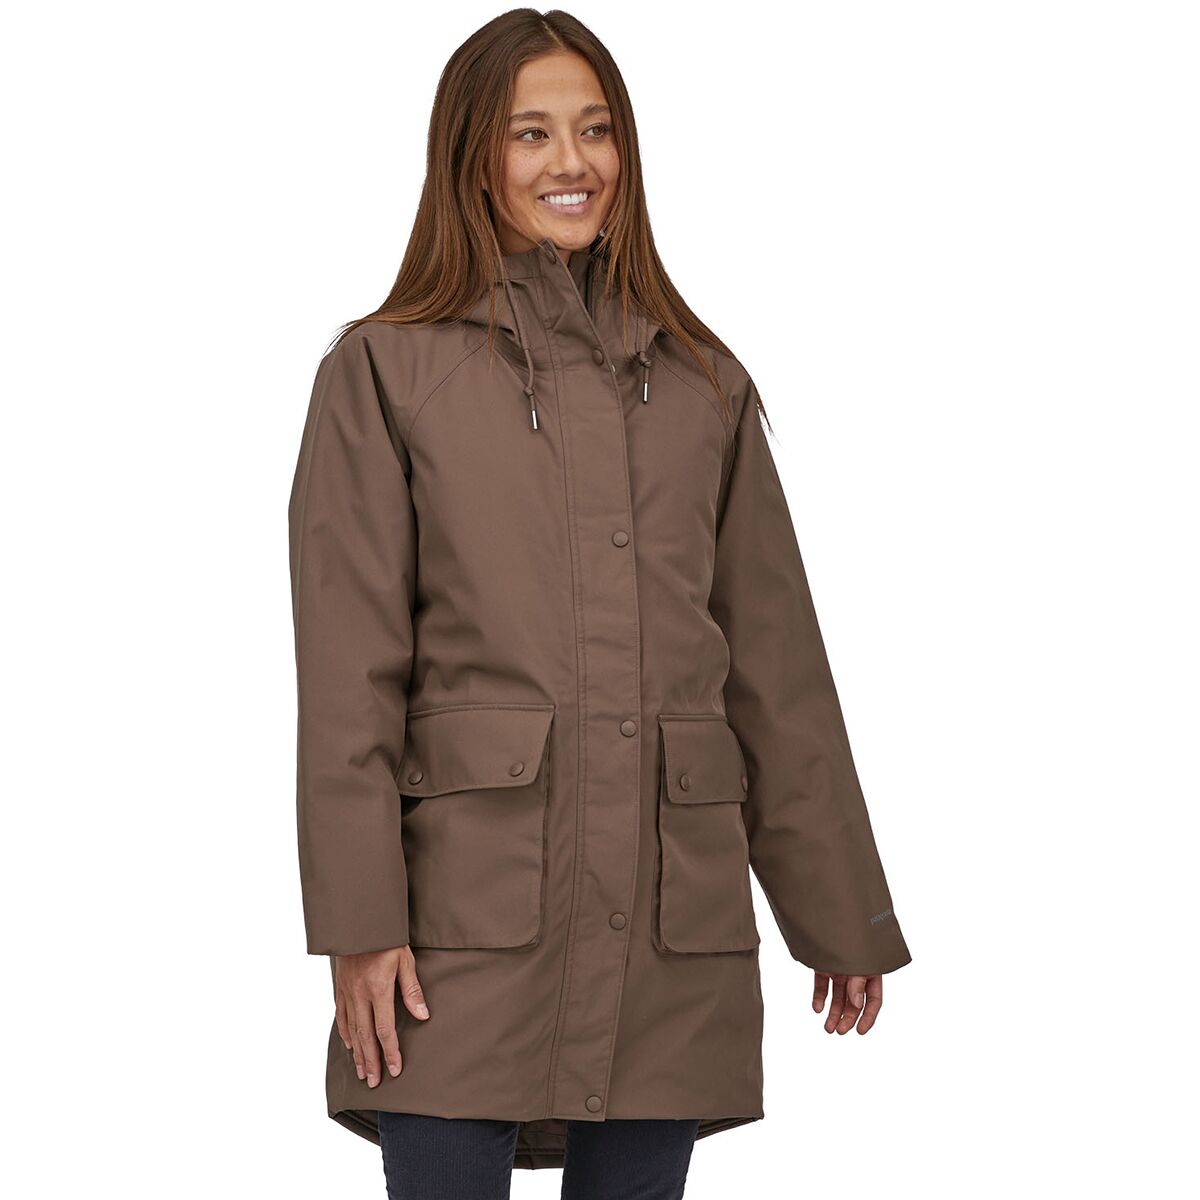 Patagonia Great Falls Insulated Parka - Women's